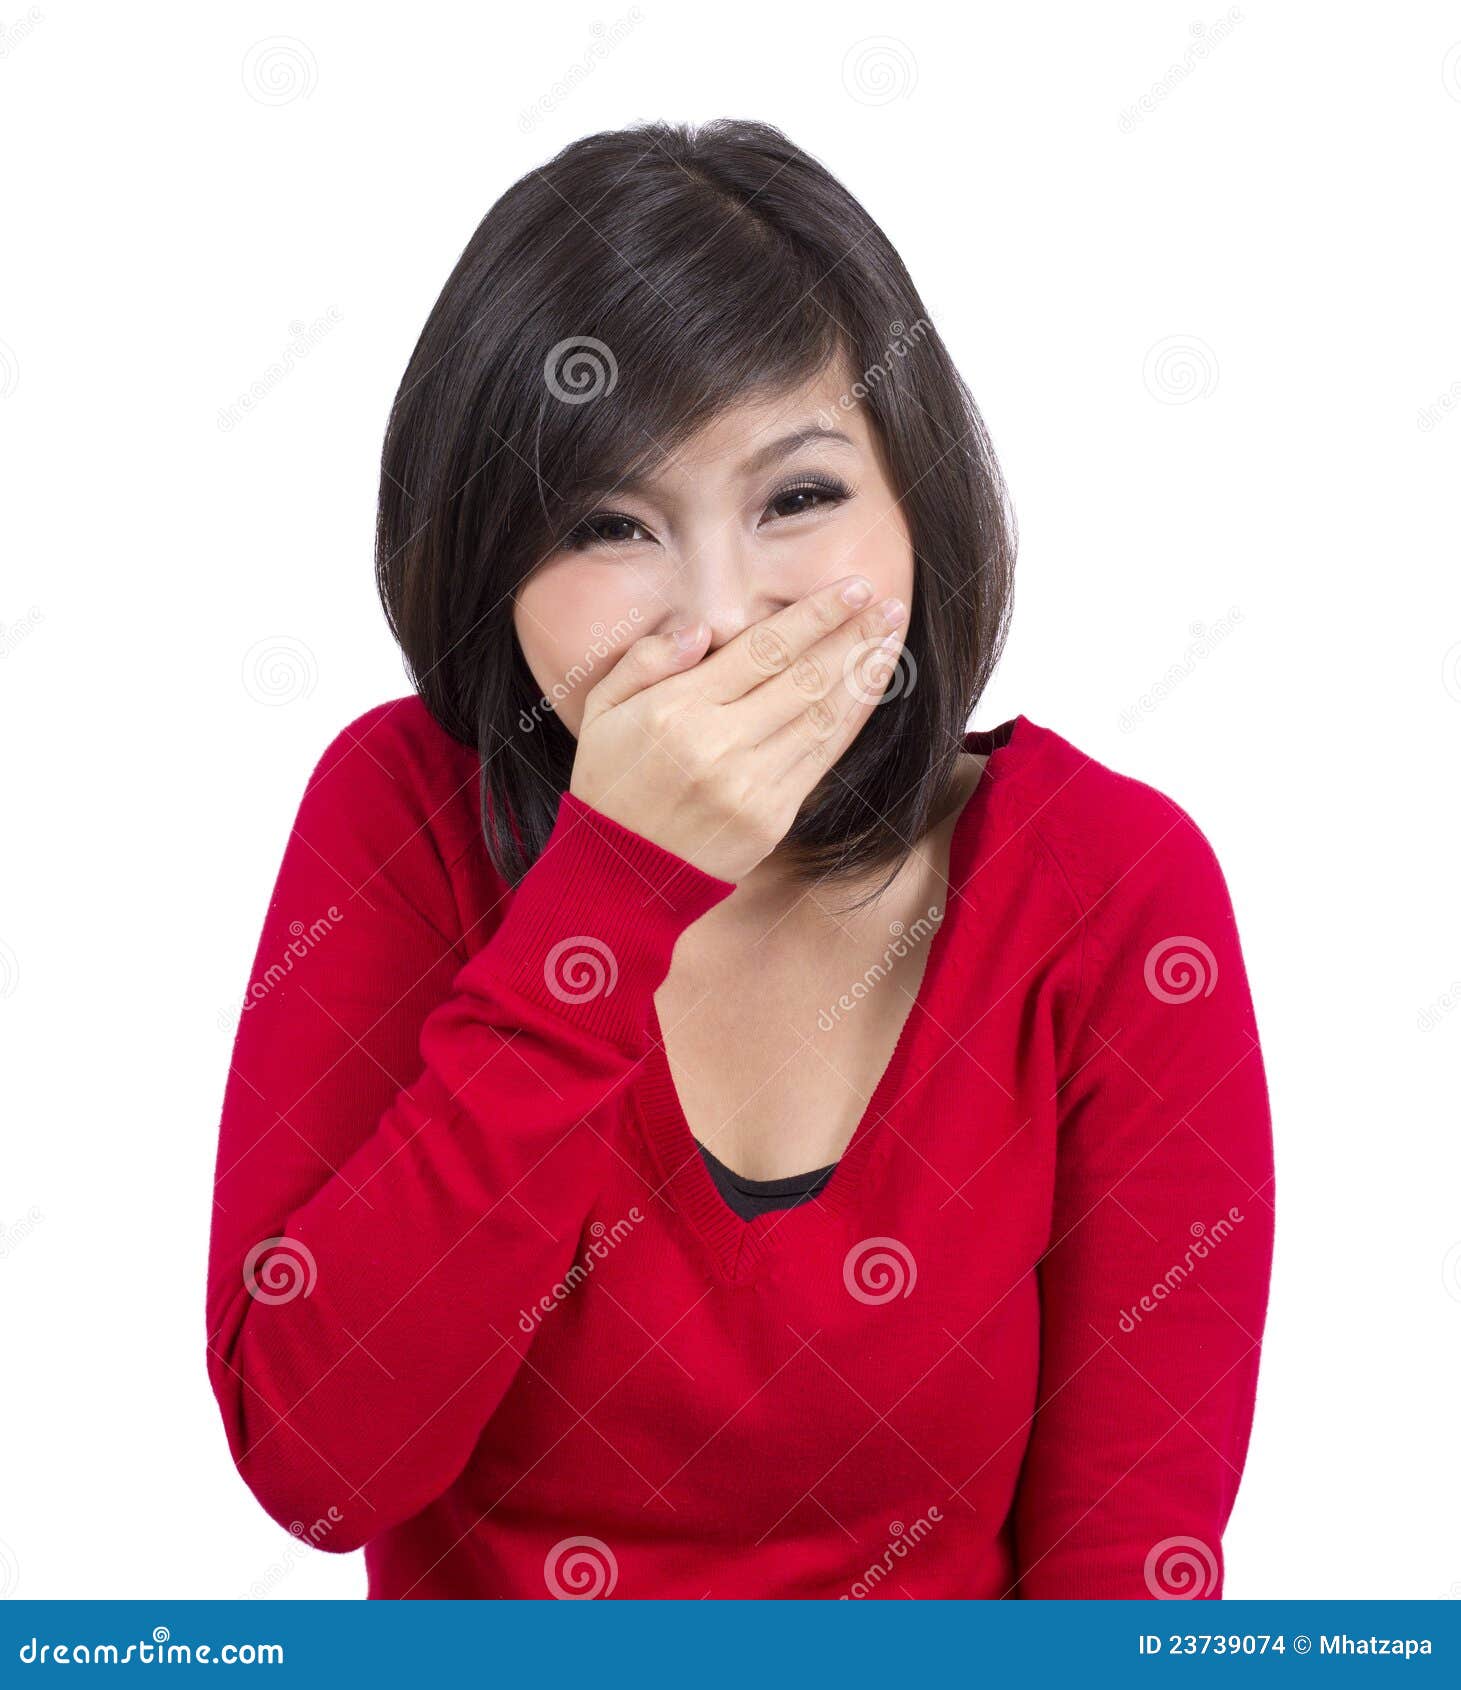 Pretty Young Girl Laughing Stock Images Image 23739074